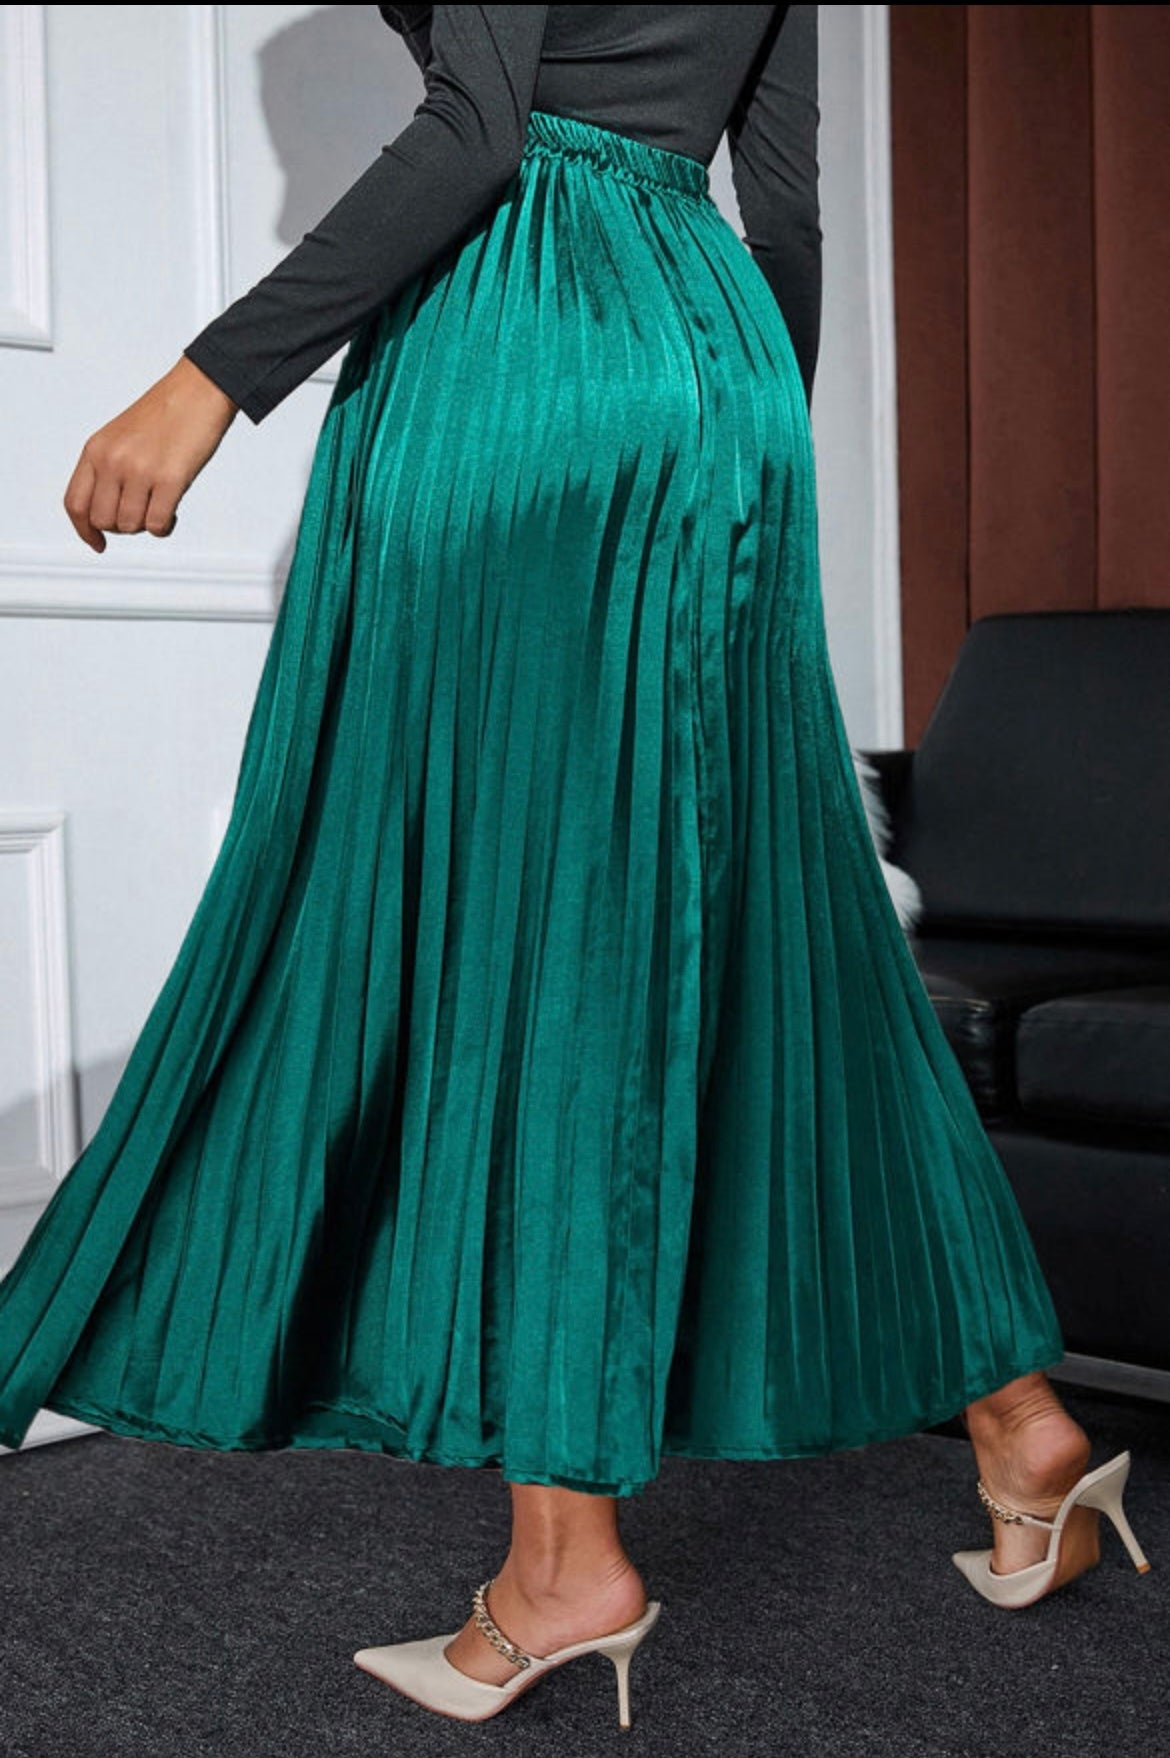 Teal Pleated Skirt was $39